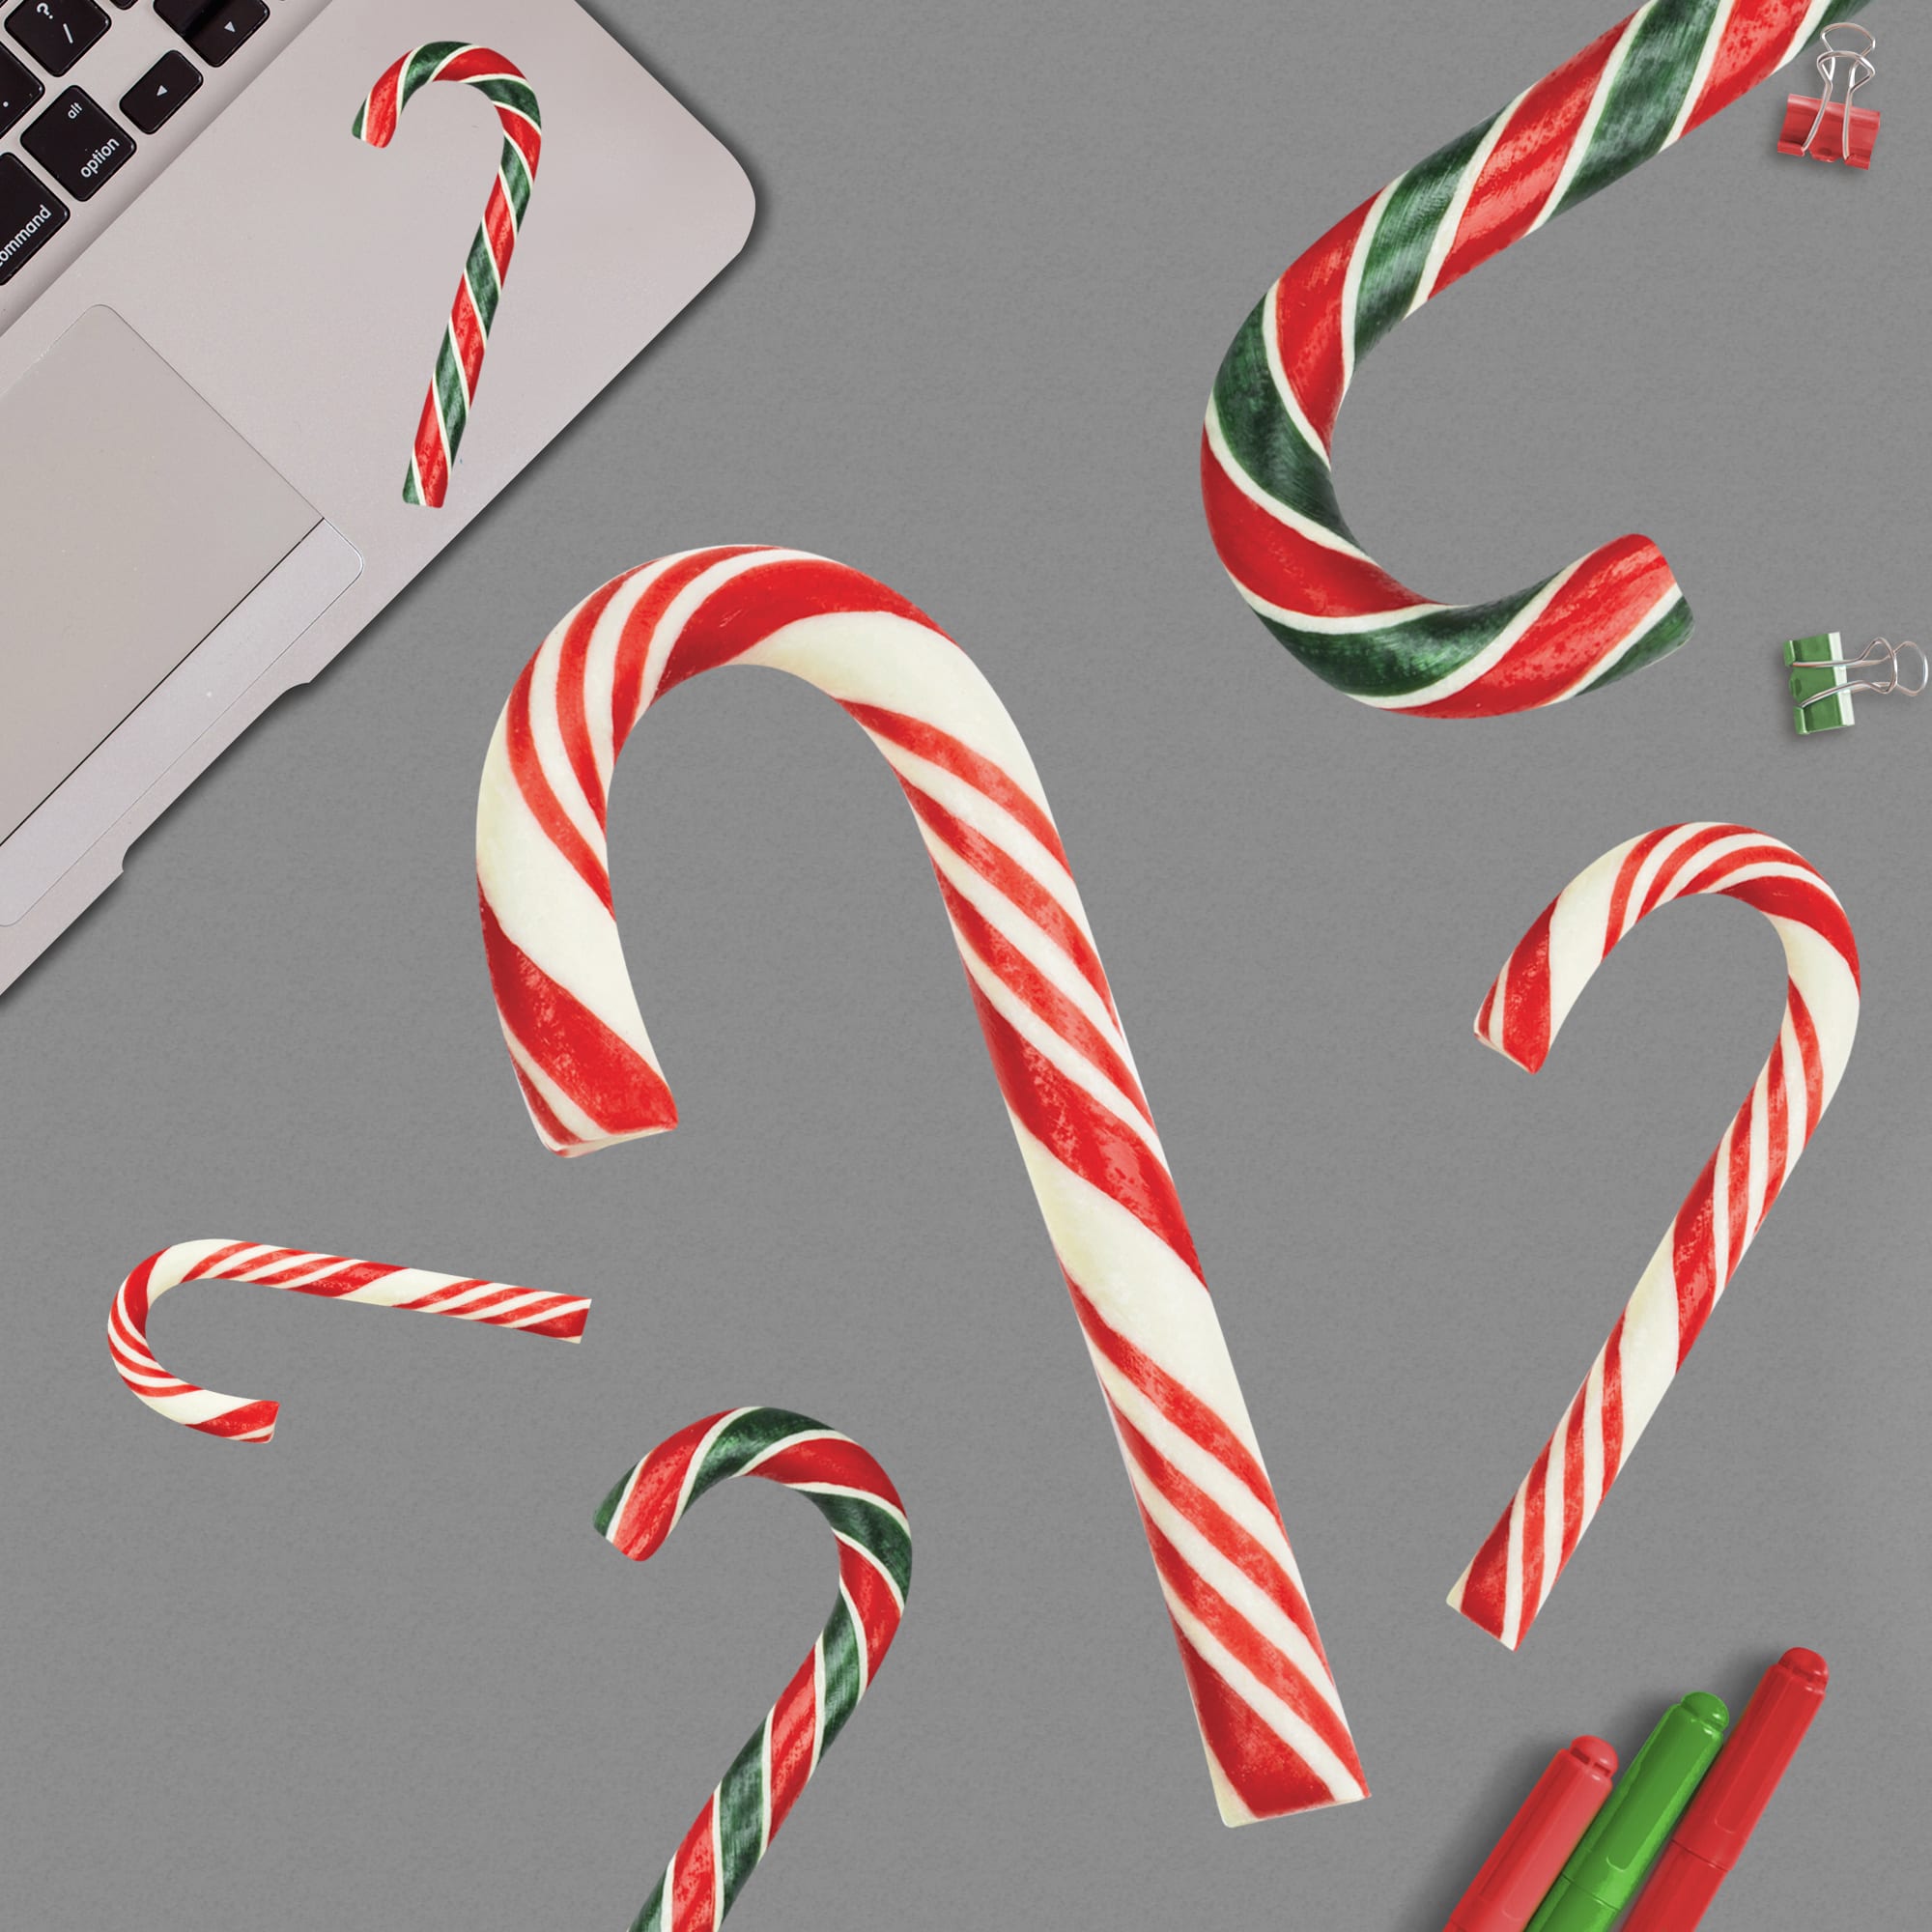 Candy Cane Collection - Removable Vinyl Decal 12.0"W x 17.0"H by Fathead